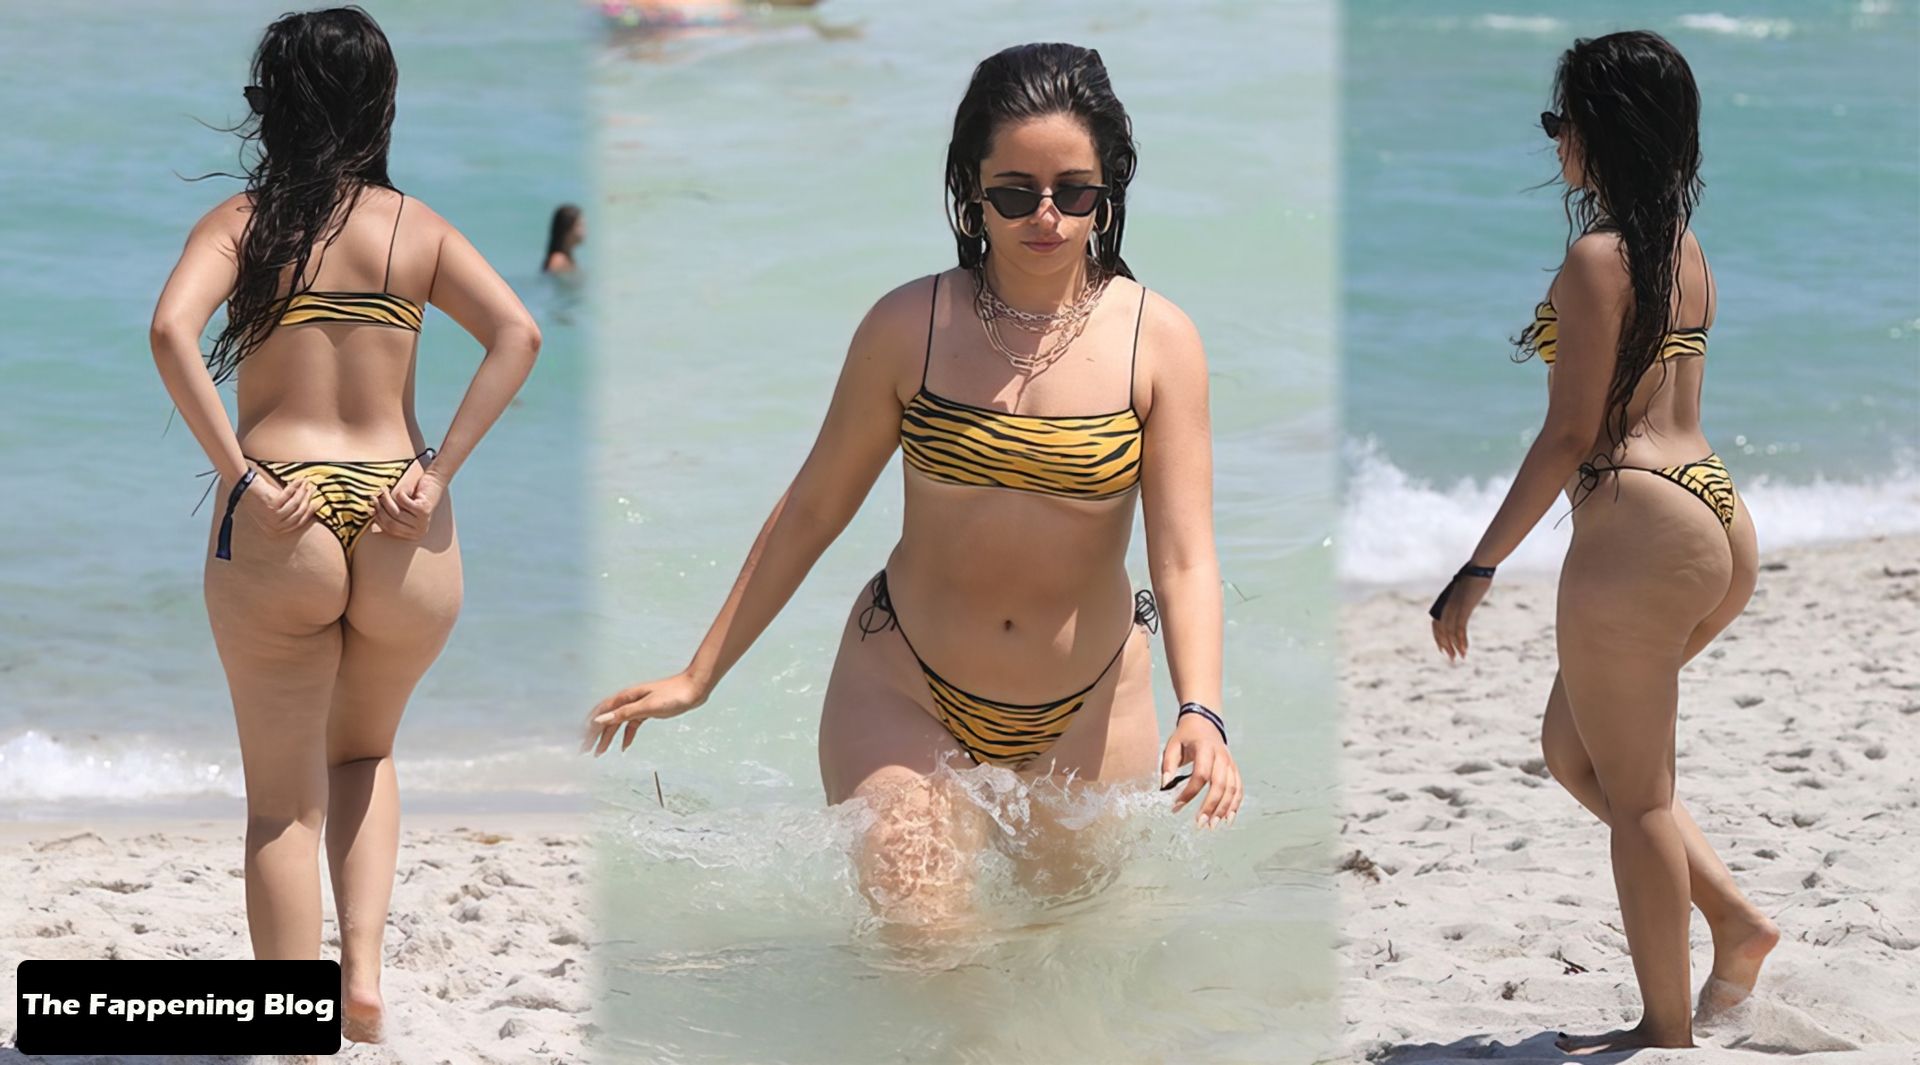 Singer Camila Cabello is pictured in Miami beach taking a few days off whil...